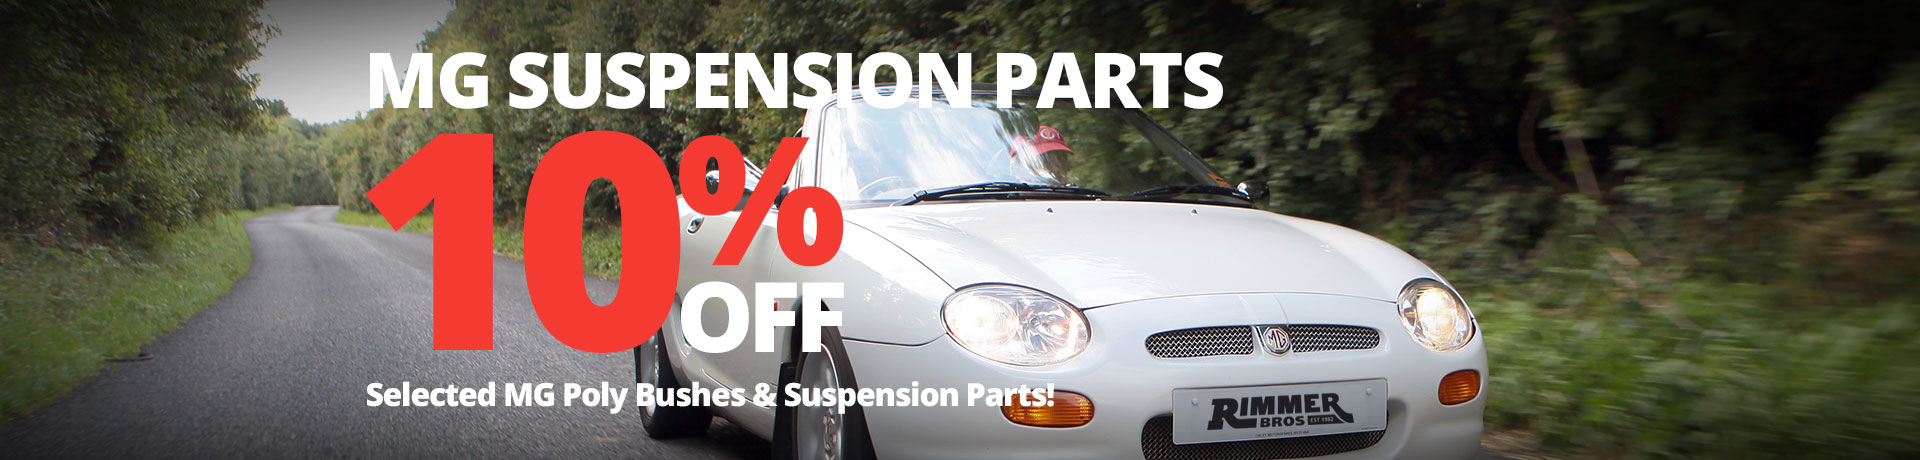 10% off Selected Poly Bushes & Suspension Parts